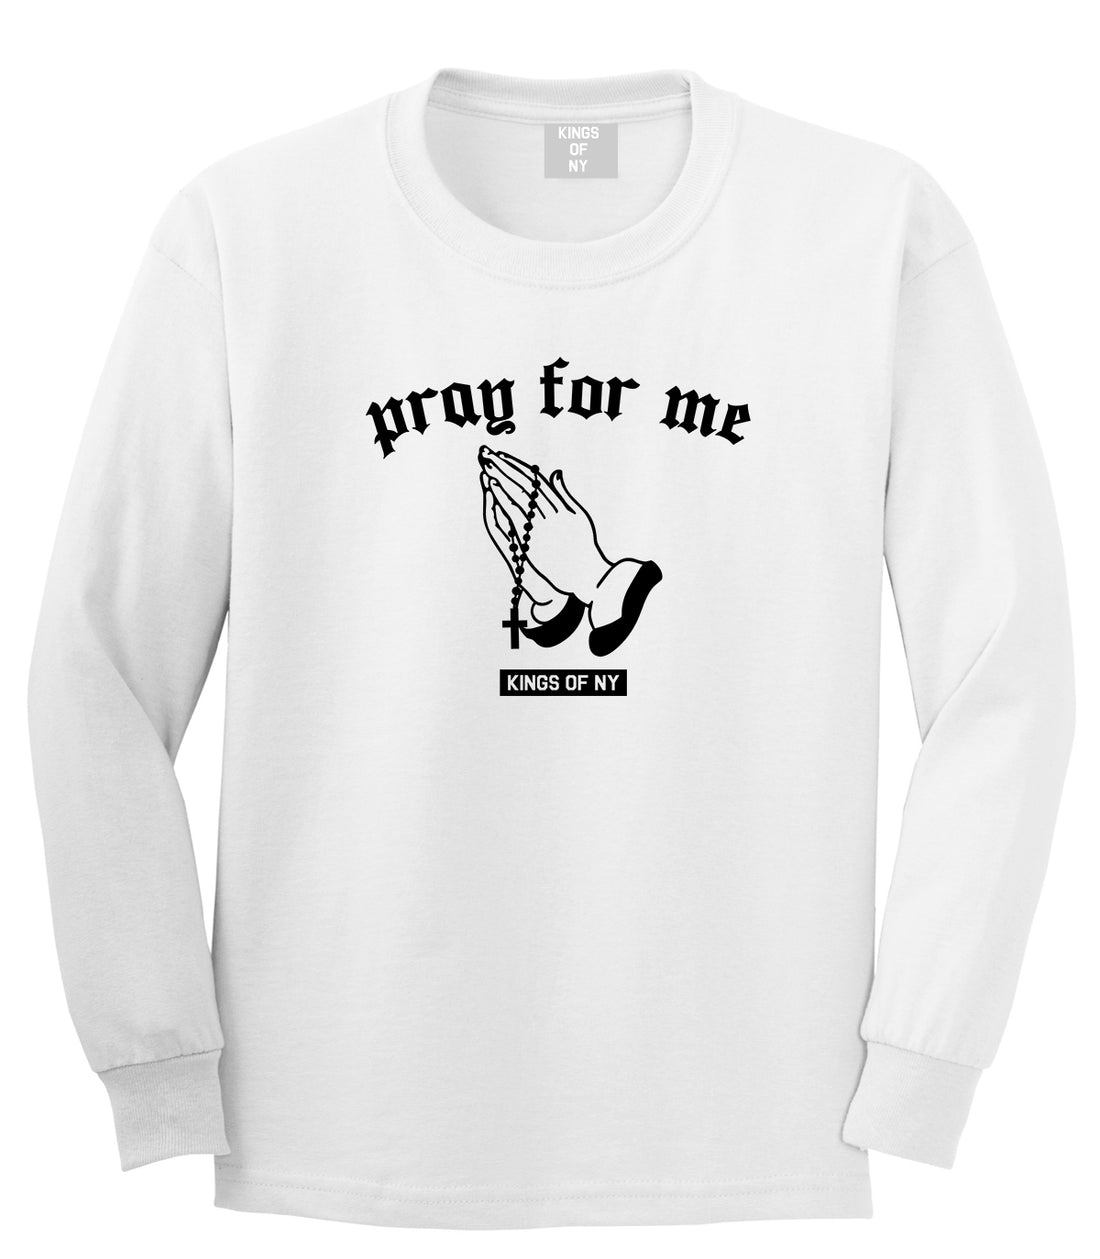 Pray For Me Mens Long Sleeve T-Shirt White by Kings Of NY